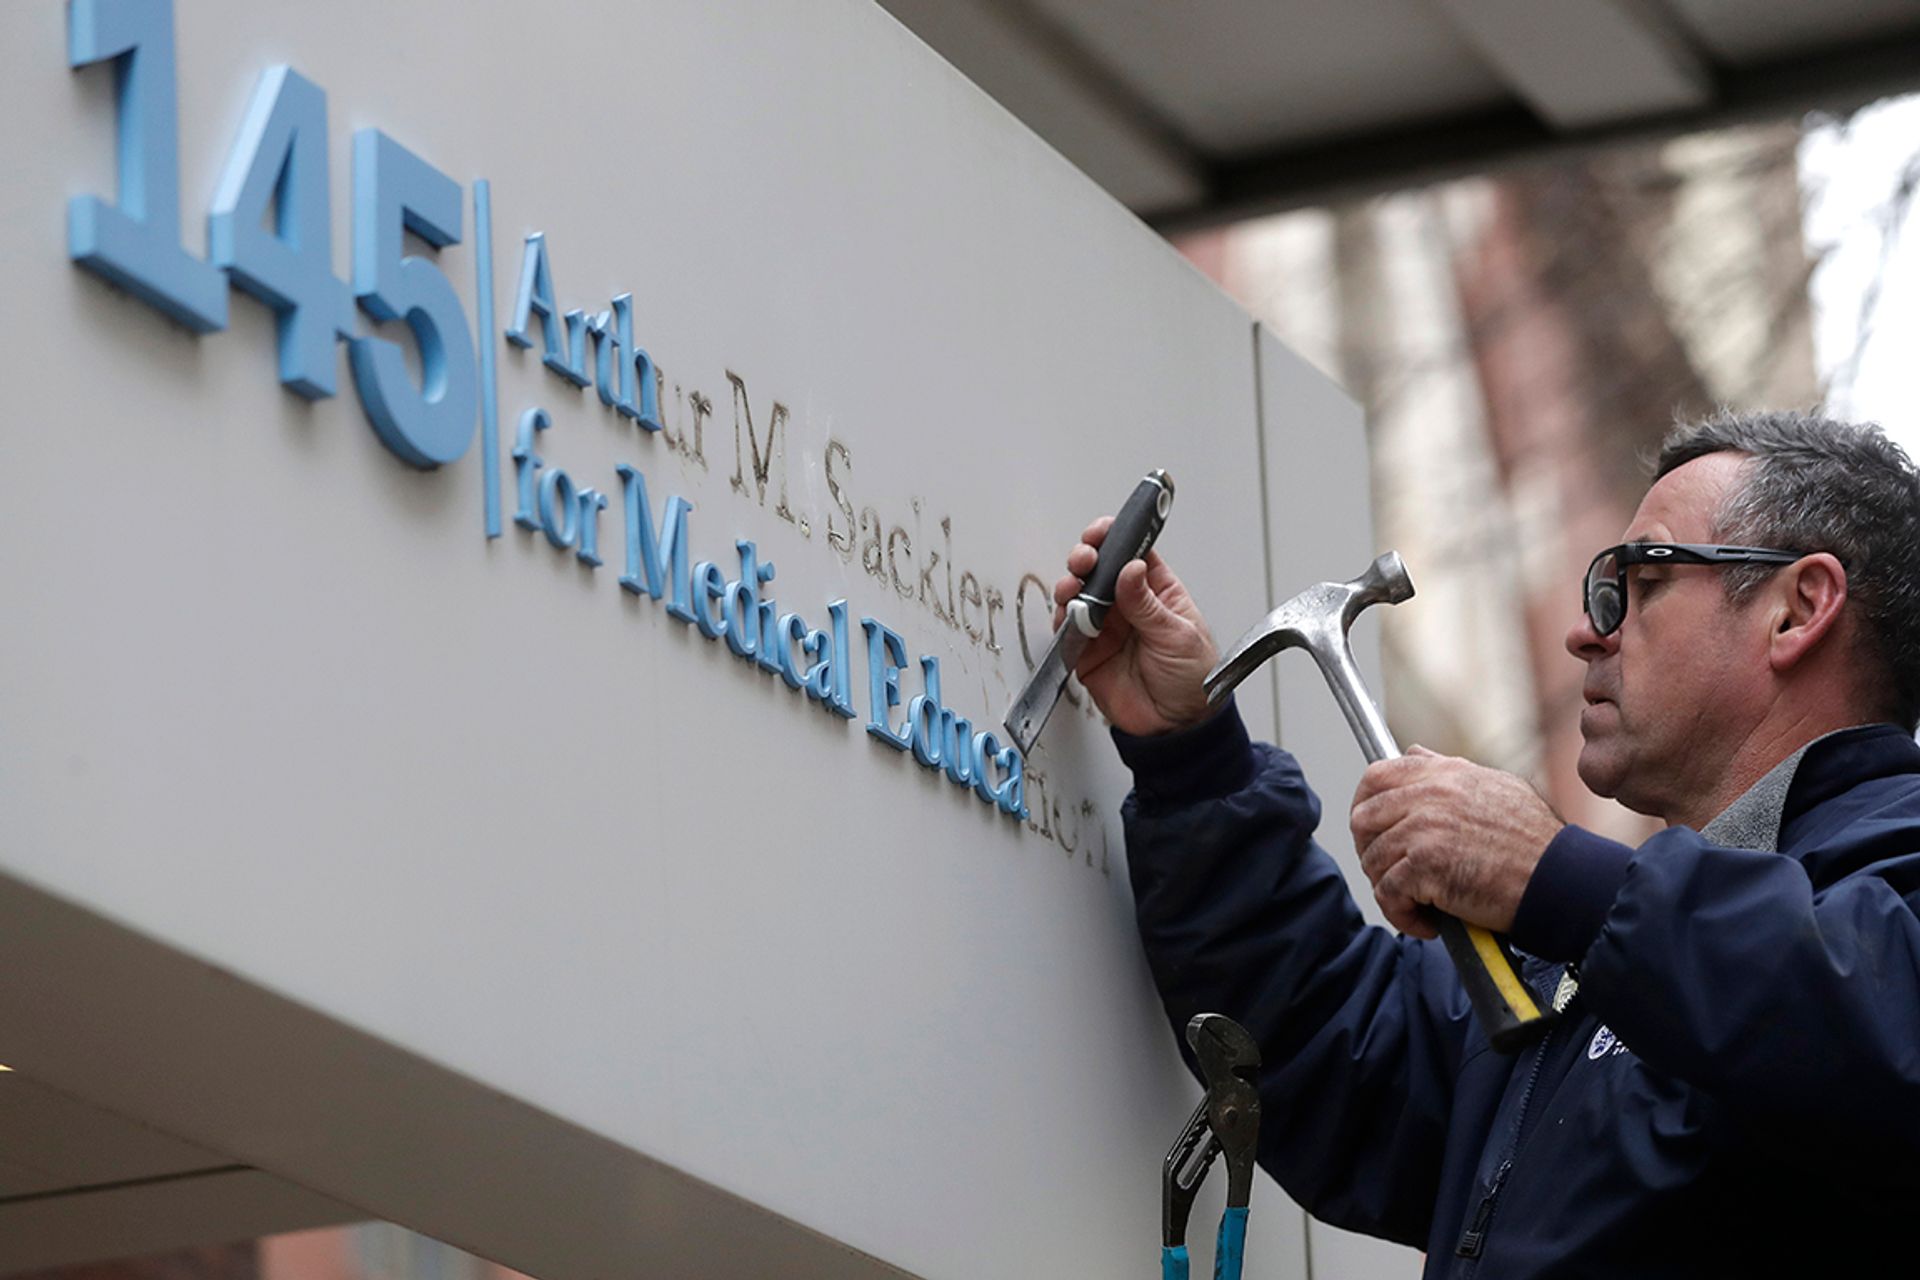 A worker removing the Sackler name today from the Arthur M. Sackler Center for Medical Education at Tufts University. The center will now be known simply as the Tufts Center for Medical Education. Steven Senne/Associated Press